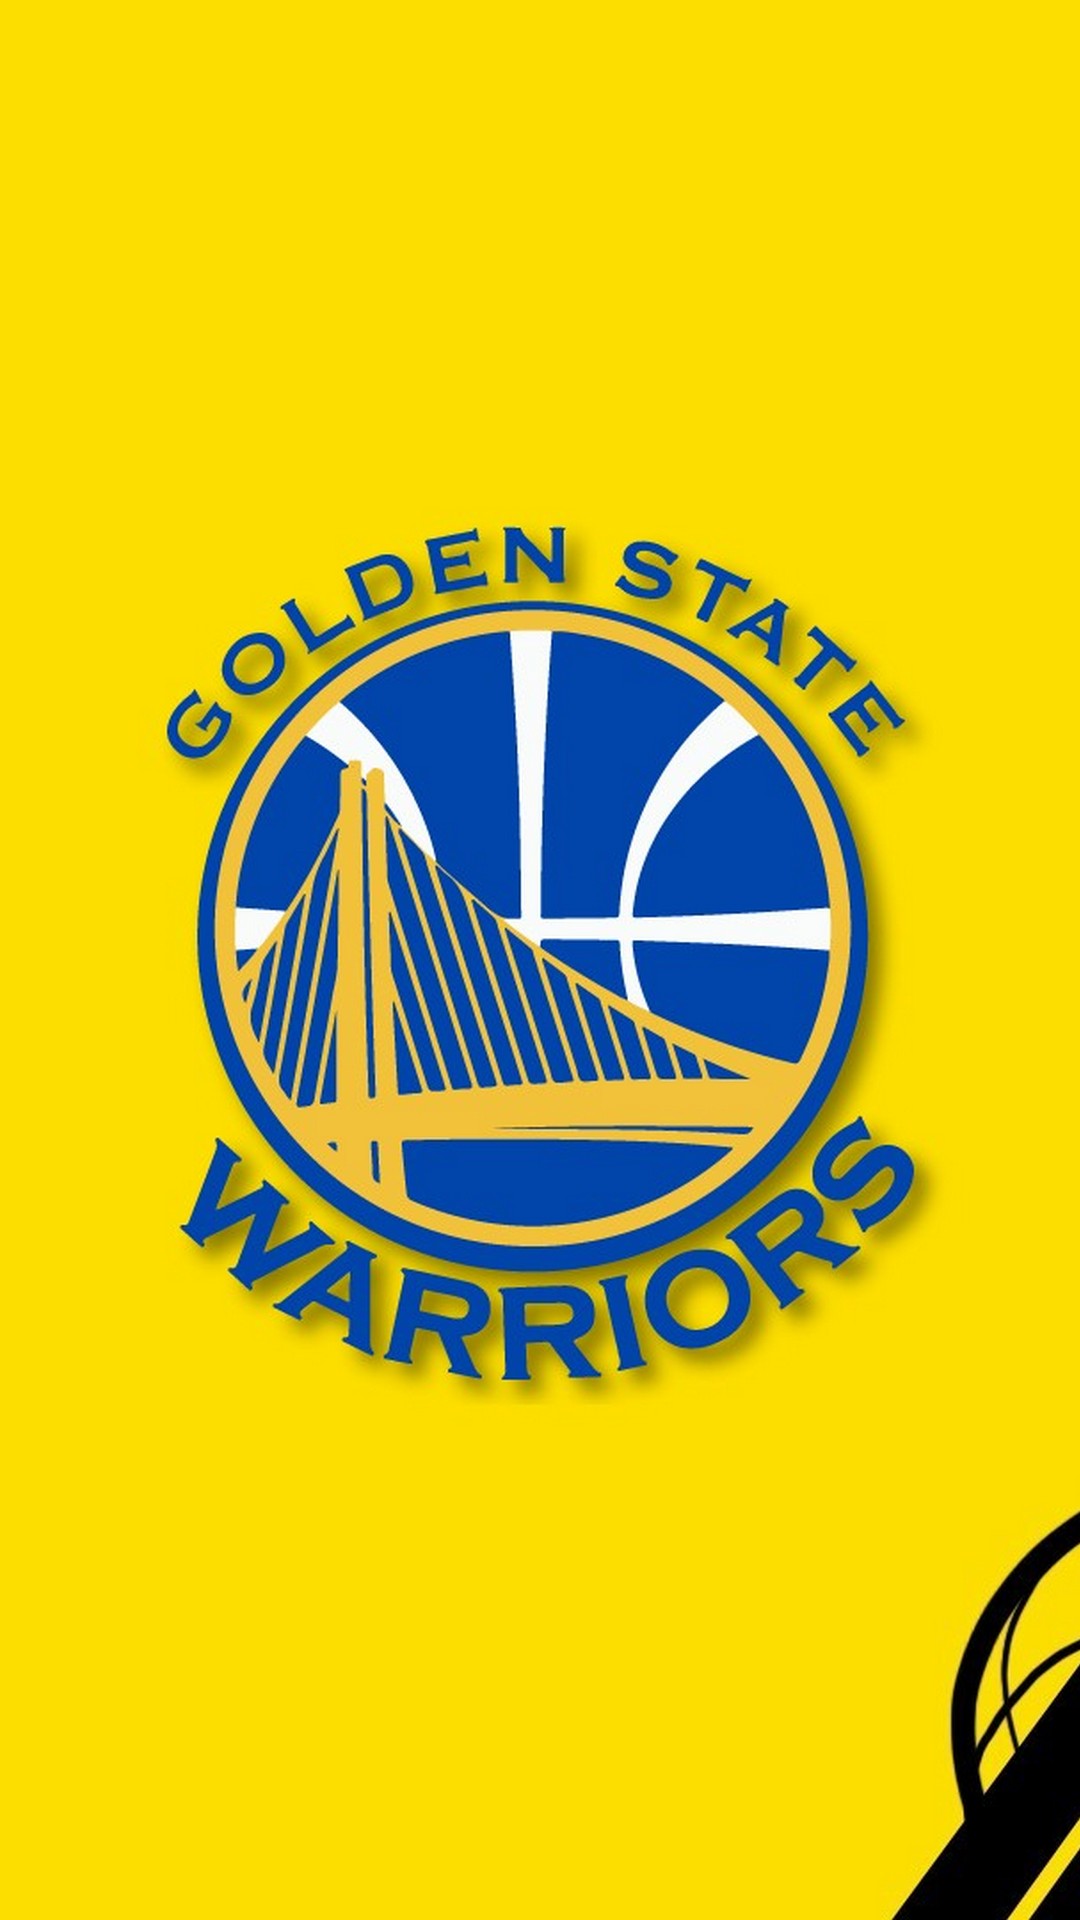 Golden State Warriors iPhone 8 Wallpaper with image resolution 1080x1920 pixel. You can use this wallpaper as background for your desktop Computer Screensavers, Android or iPhone smartphones